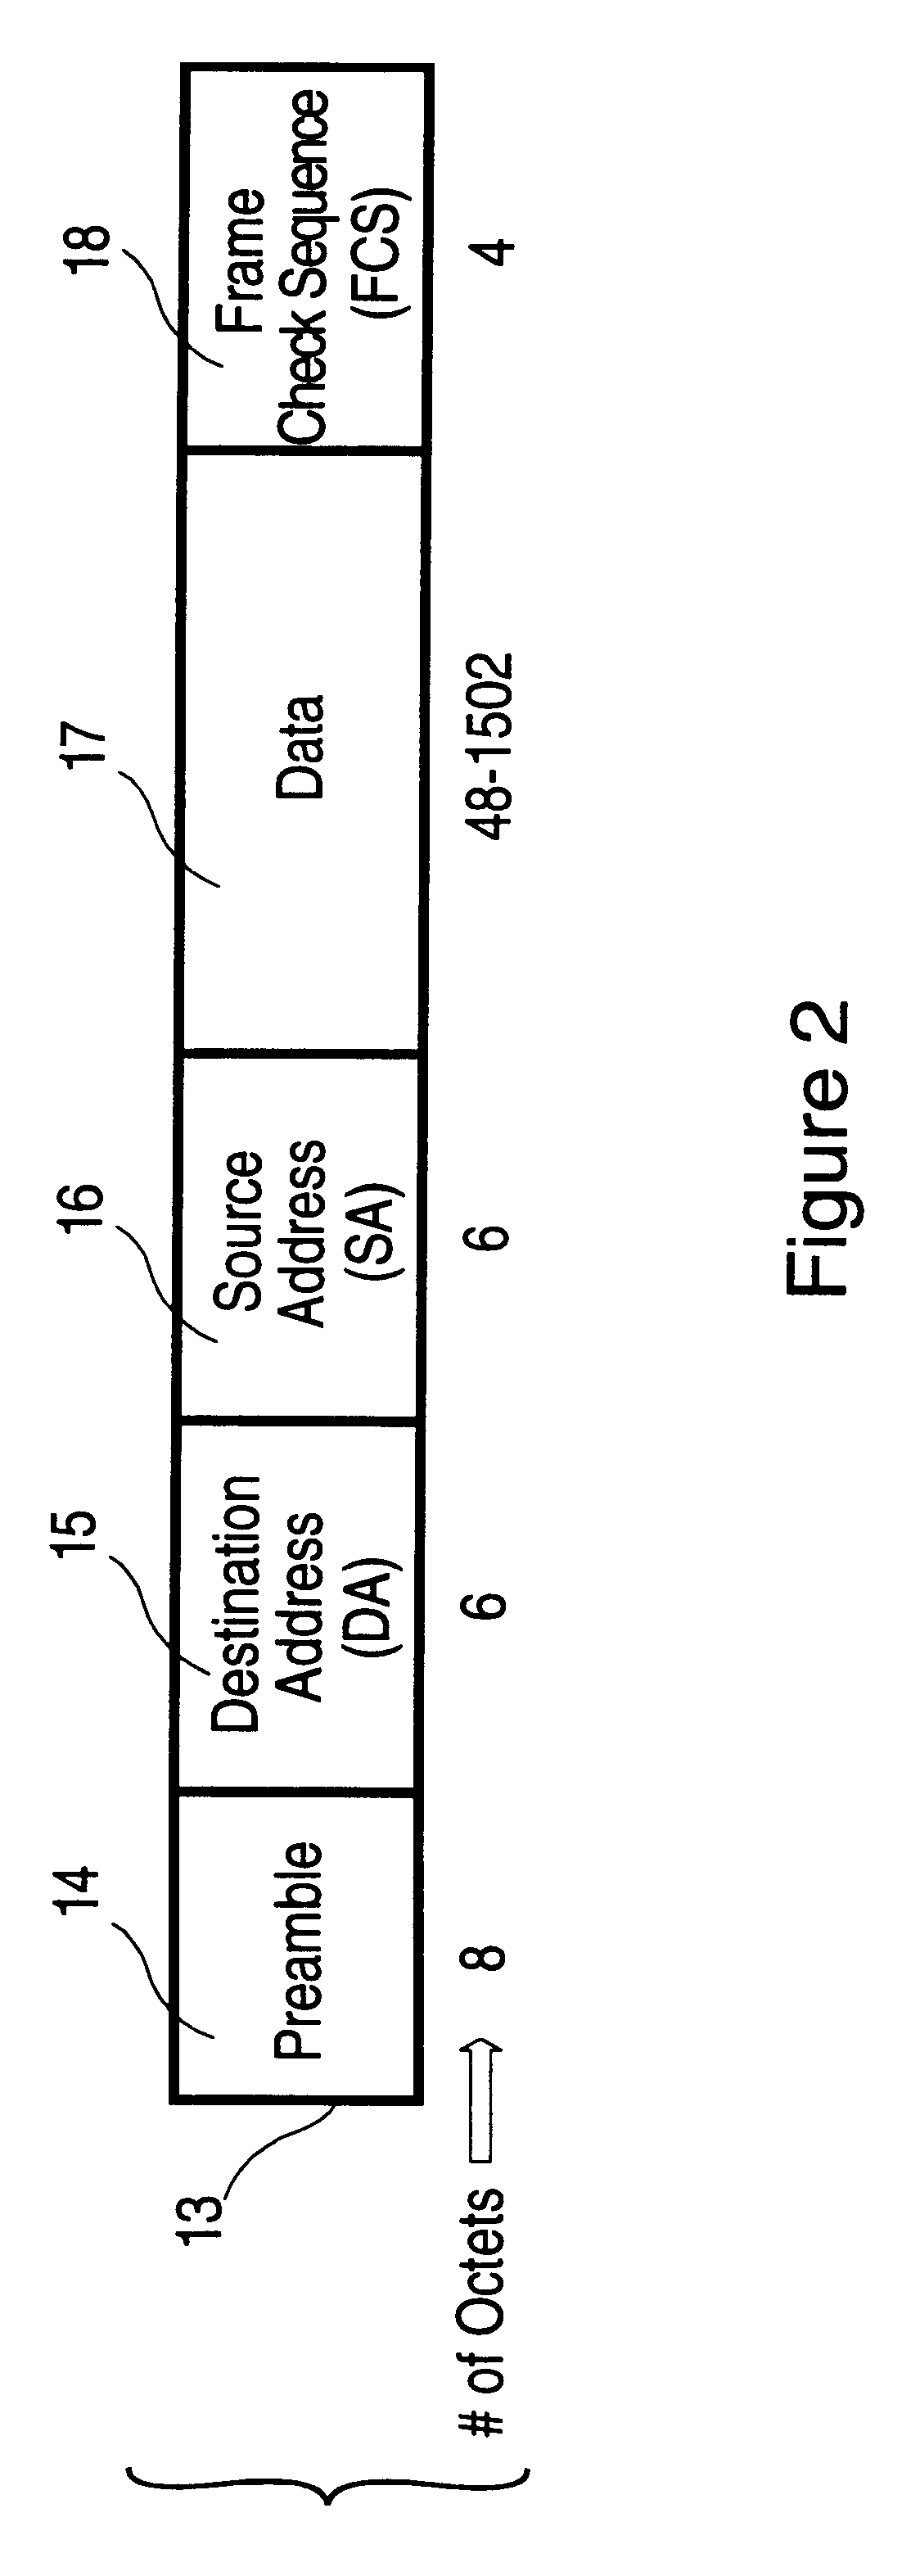 Communication apparatus and methods